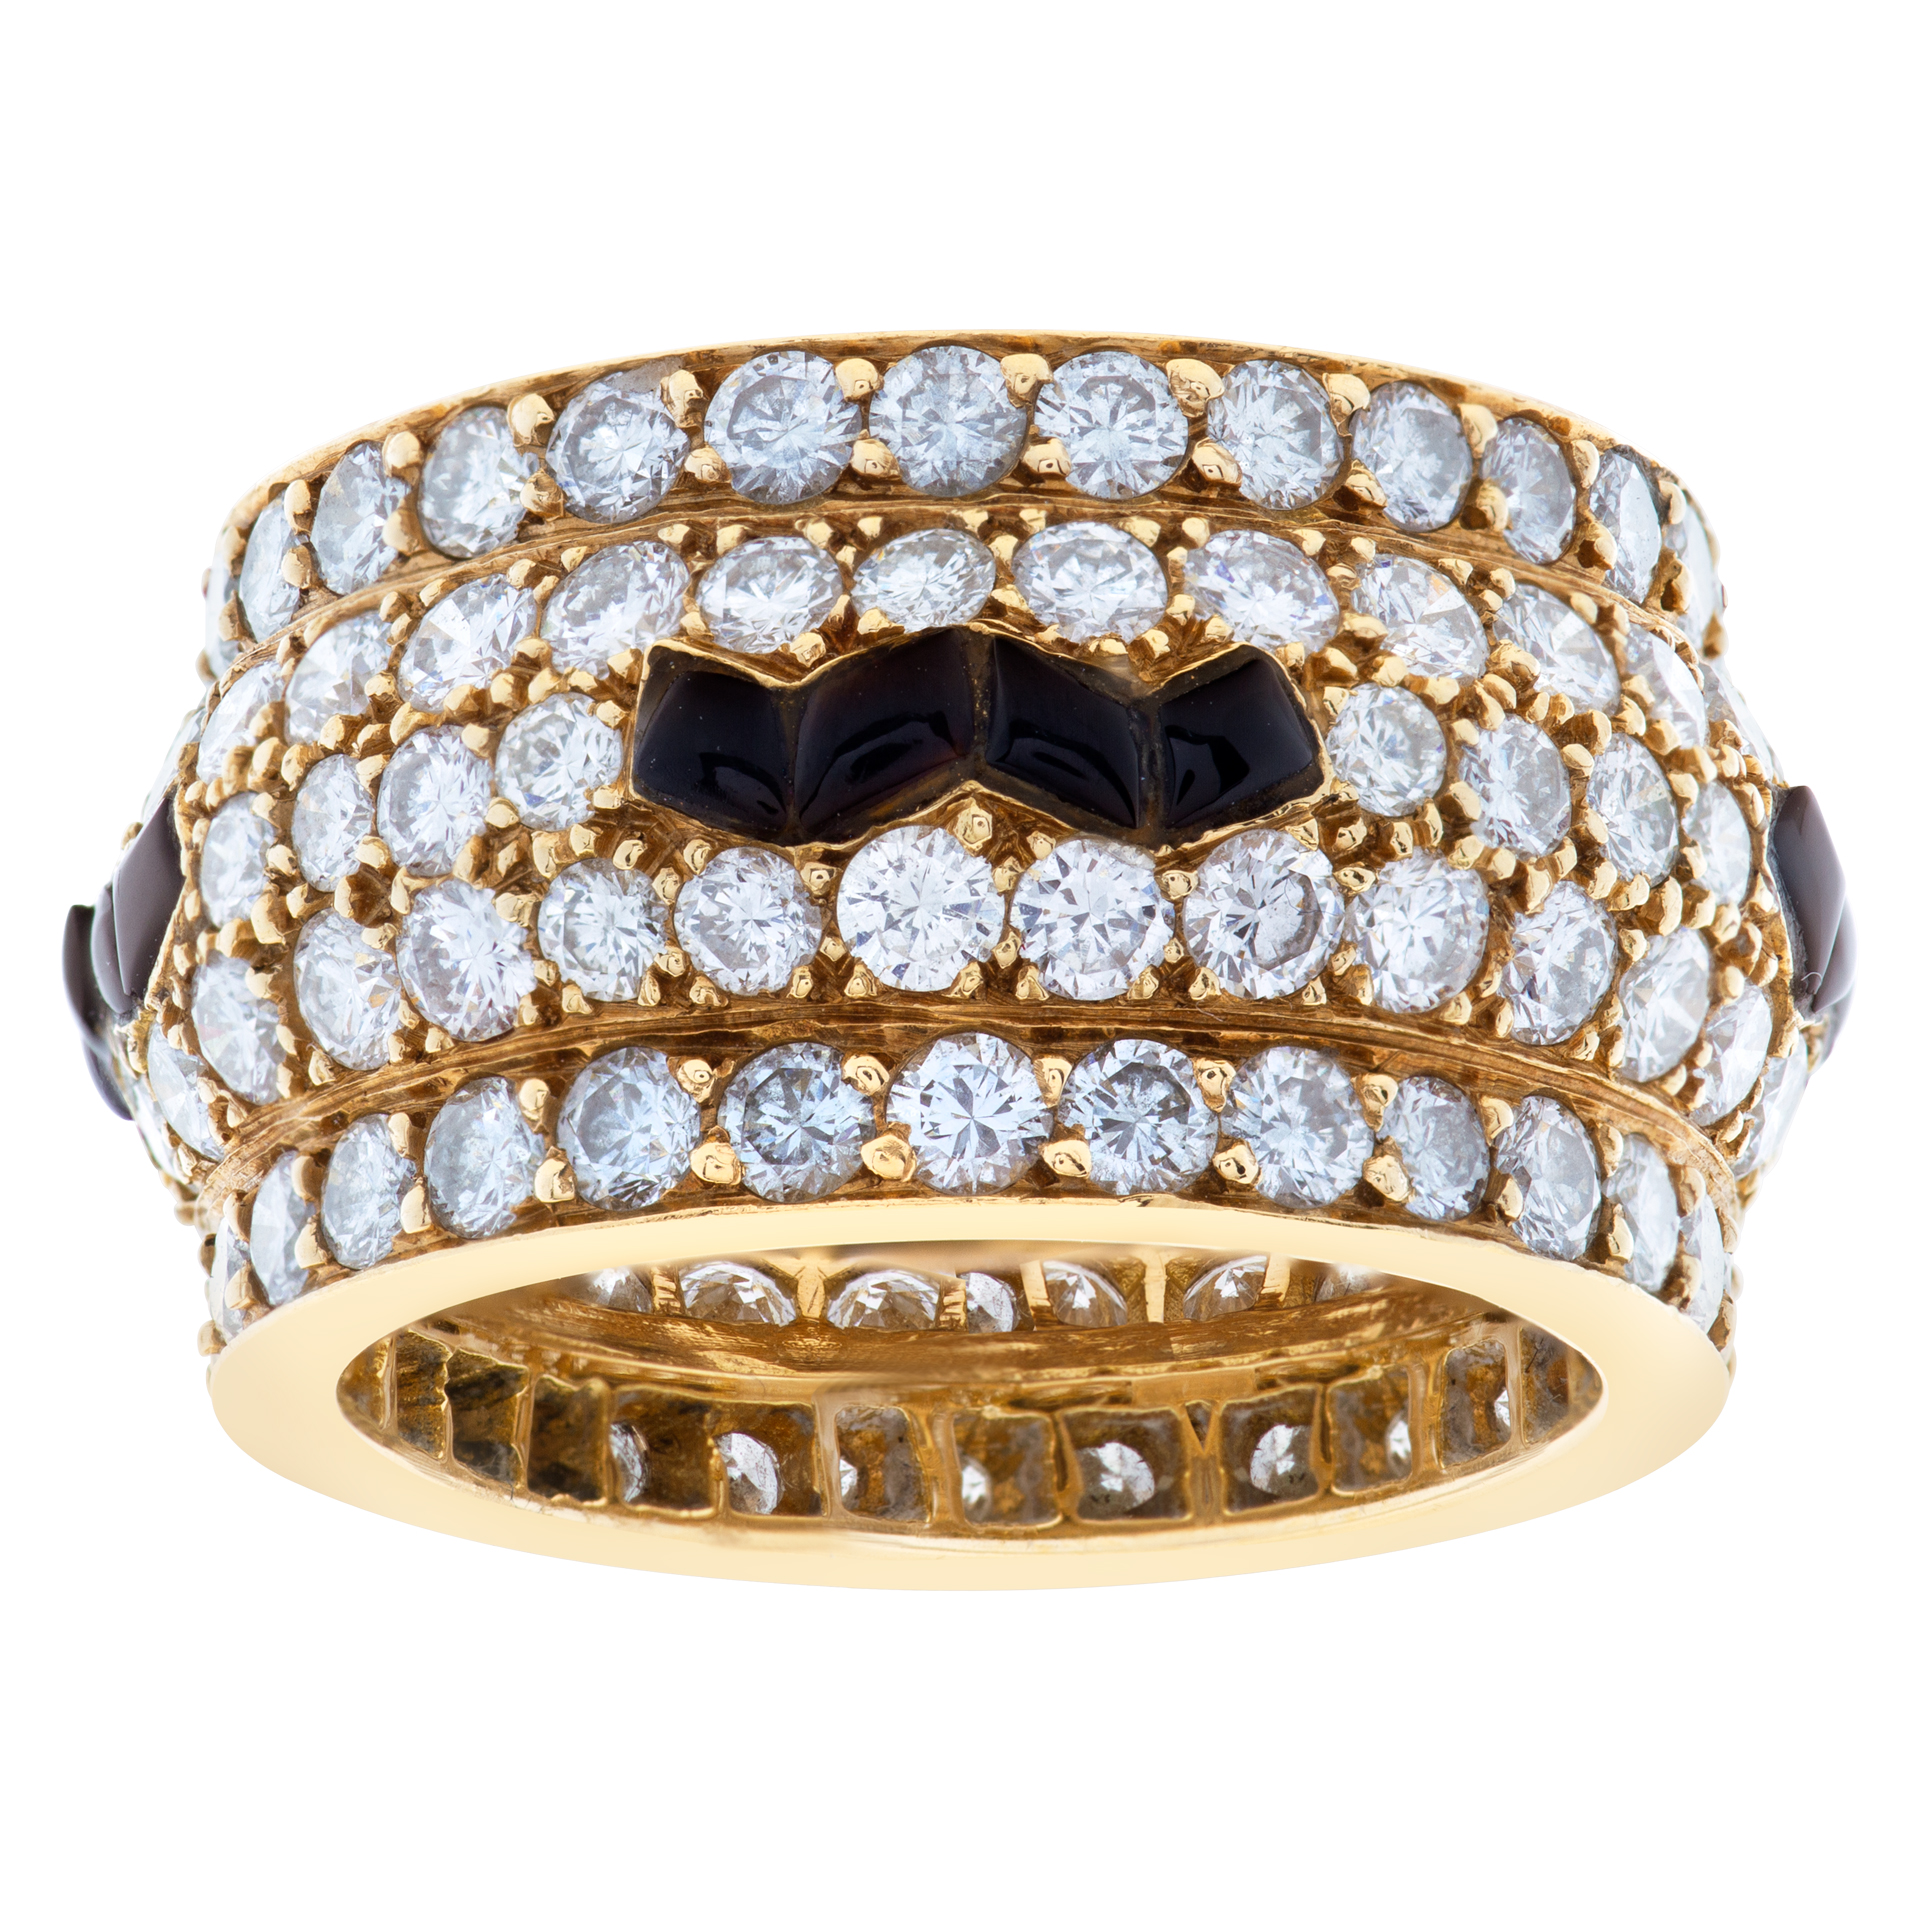 Domed diamond eternity band and ring with onyx inlay in 14k yellow gold. 5.4cts in diamonds image 1